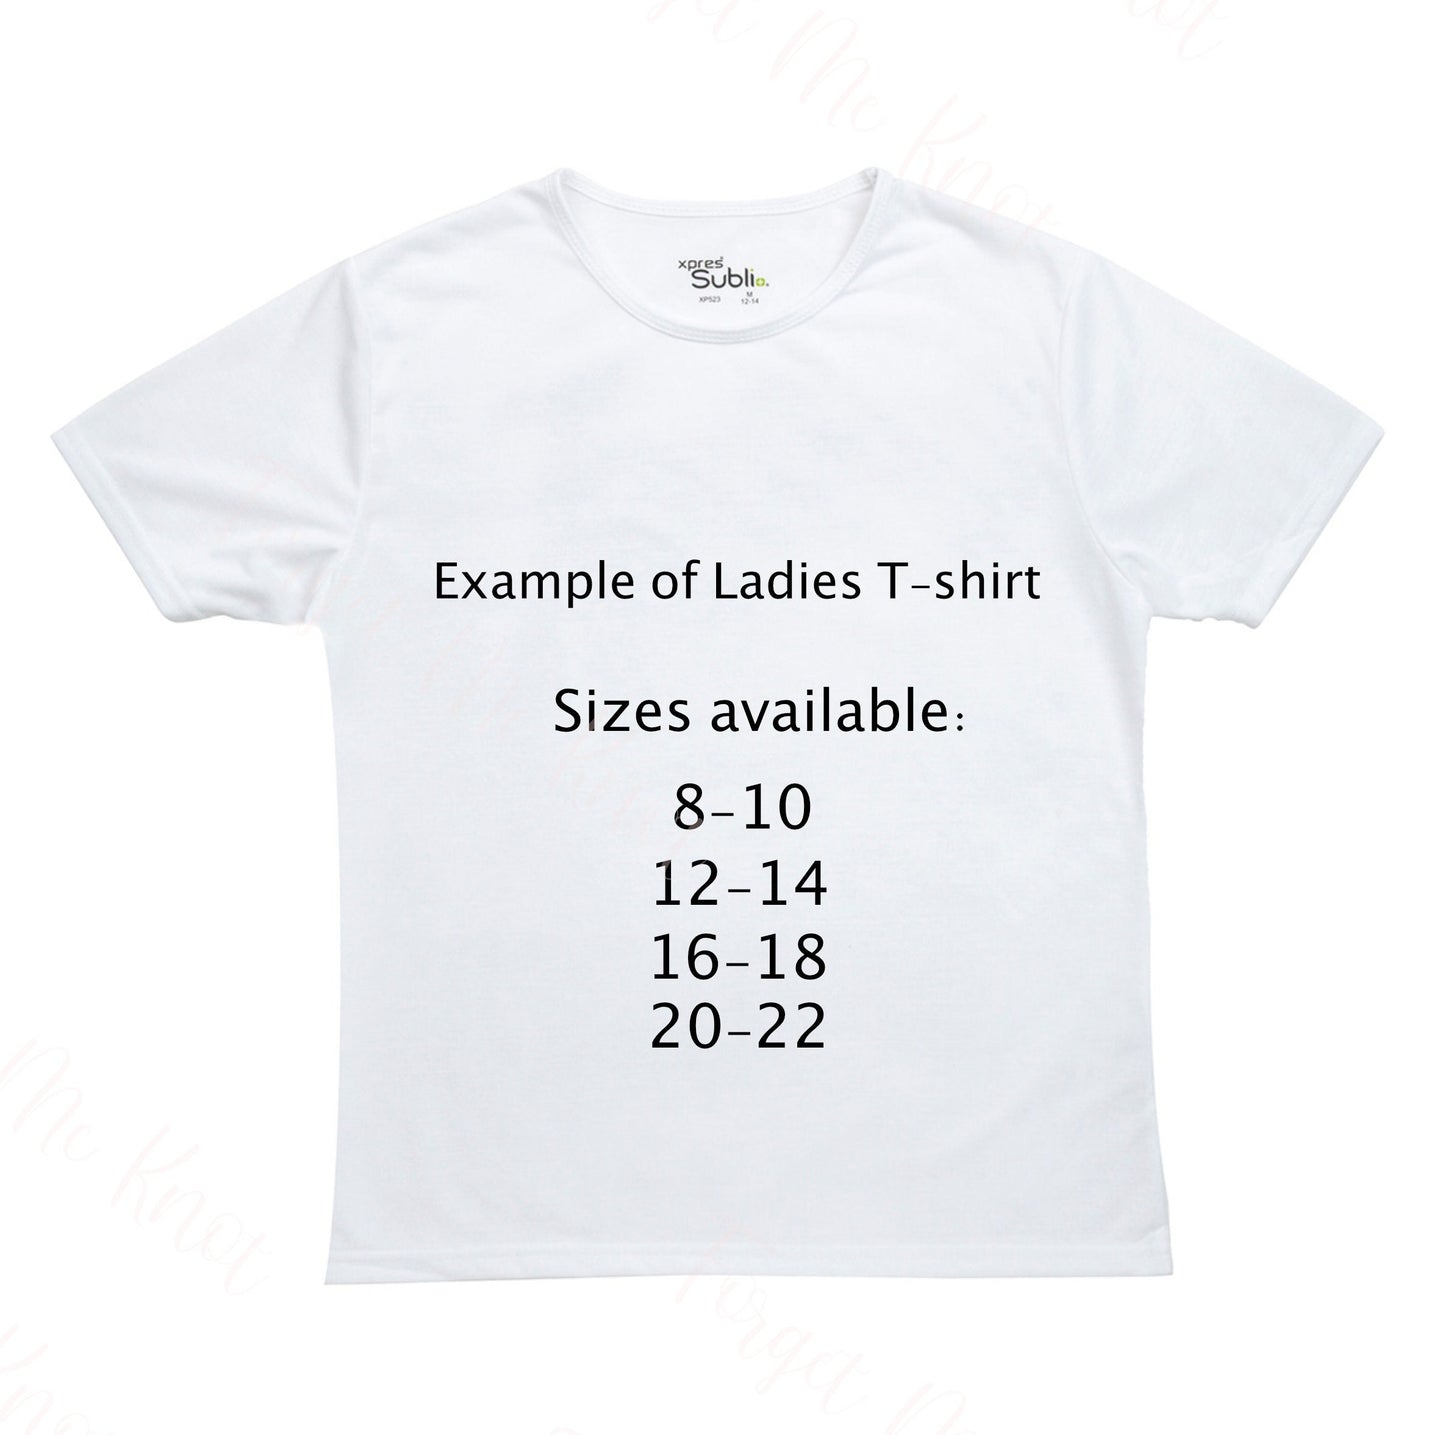 Big Sister T Shirt, Promoted To Big Sister T-Shirt, Baby Announcement TShirt, Big Sister T-Shirt